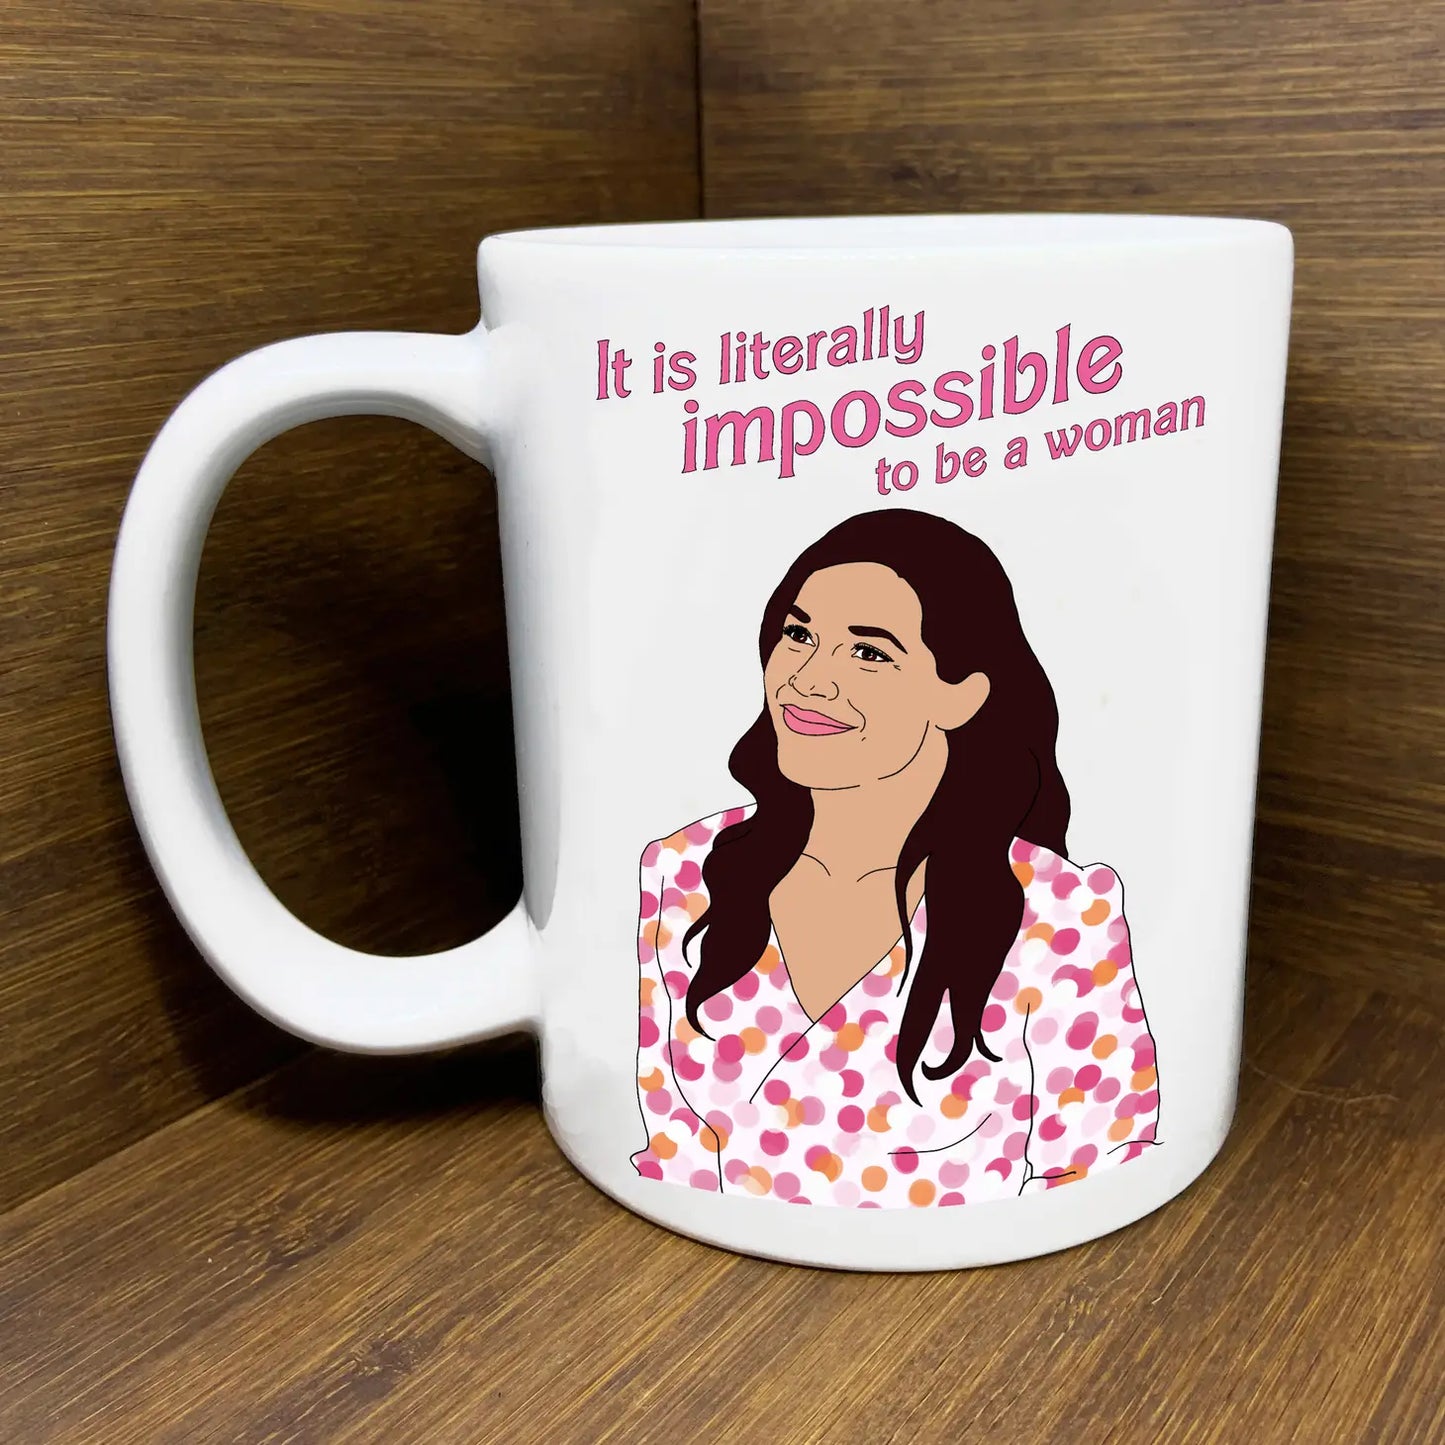 Load image into Gallery viewer, It Is Literally Impossible To Be A Woman 11 oz Mug
